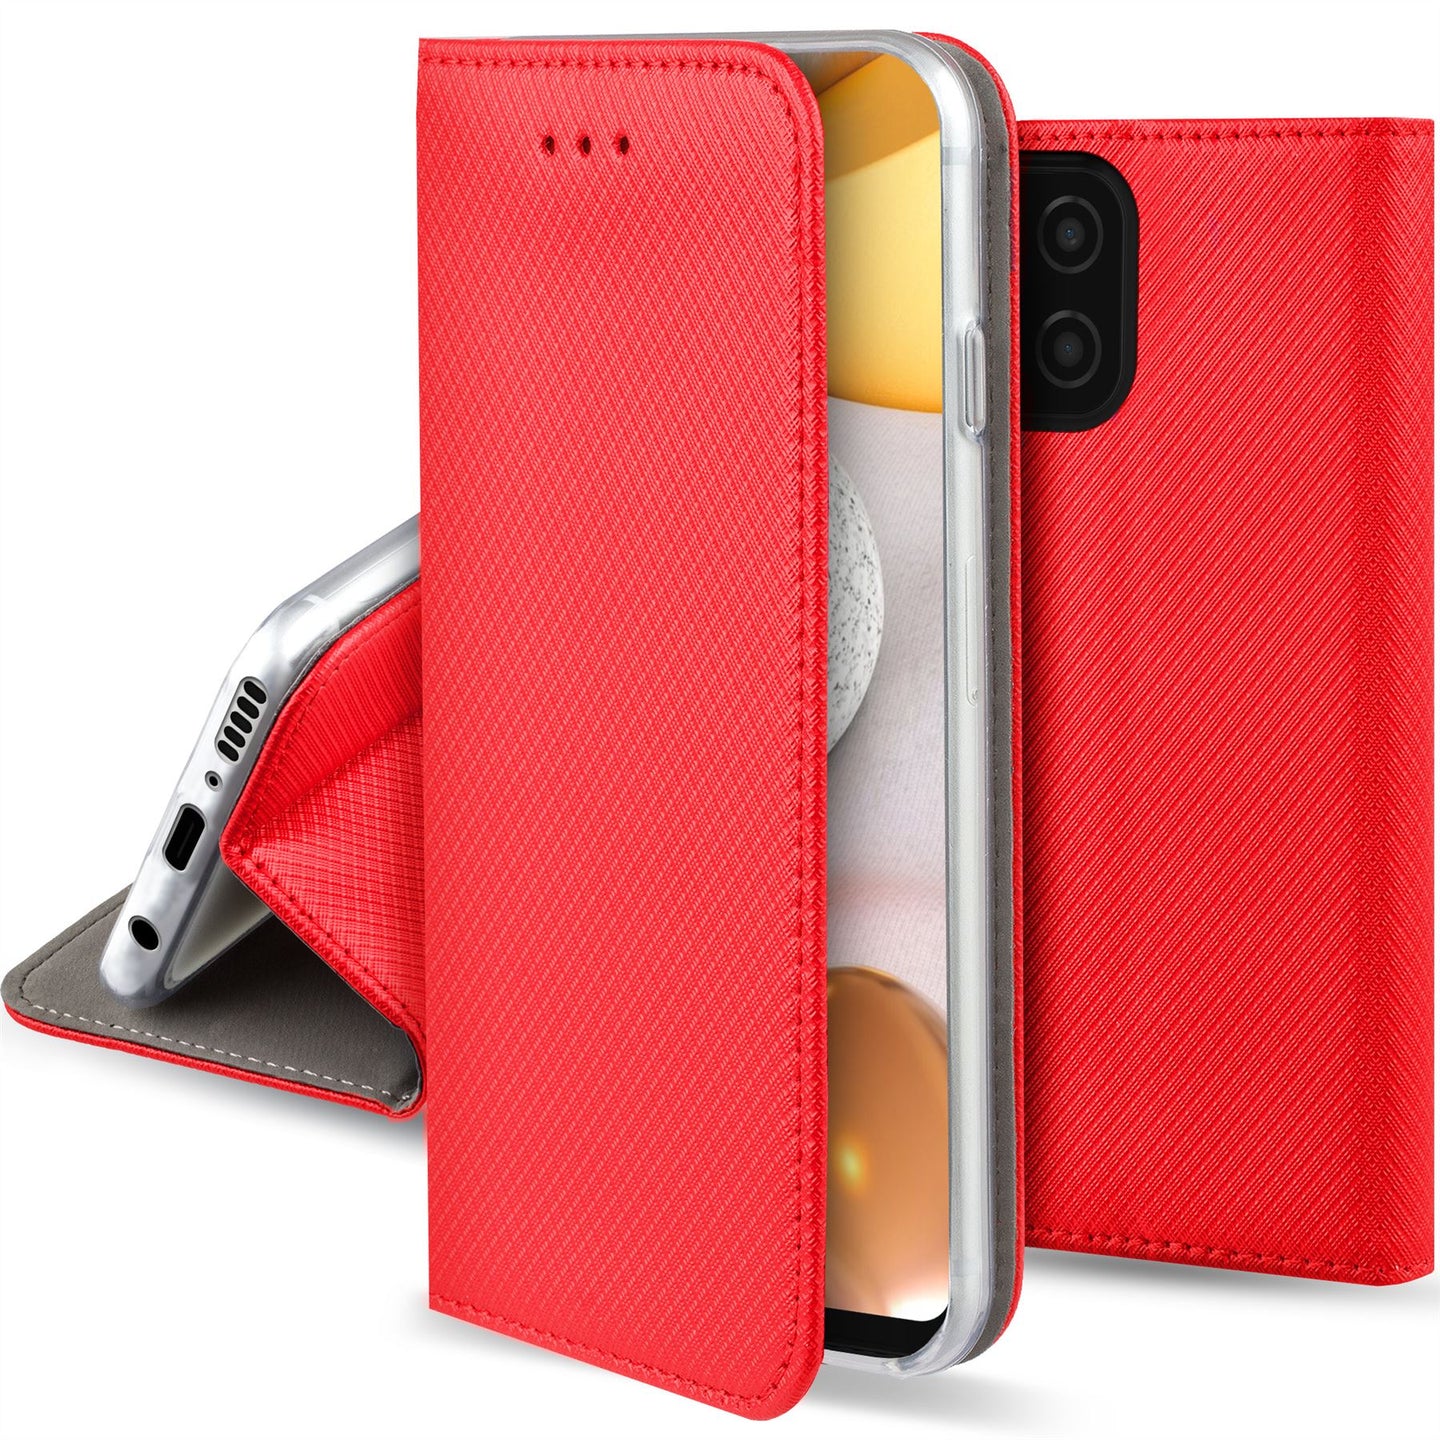 Moozy Case Flip Cover for Samsung A42 5G, Red - Smart Magnetic Flip Case with Card Holder and Stand